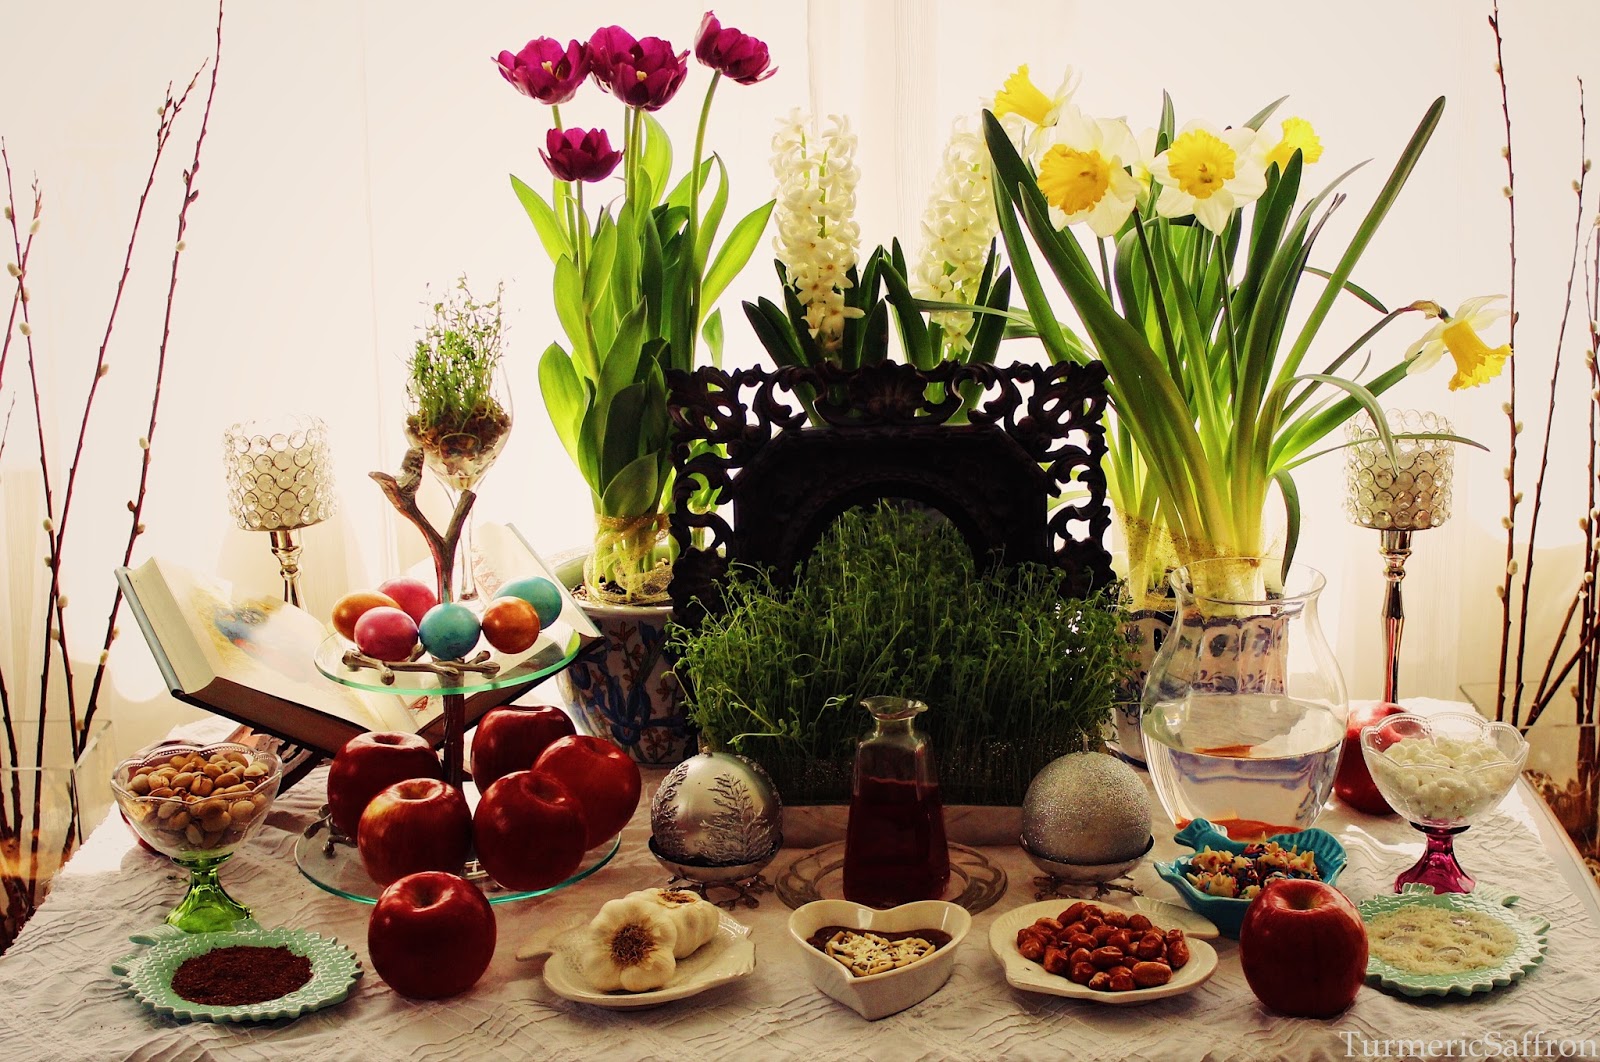 Turmeric & Saffron Celebration and Traditions of Nowruz The Seven S